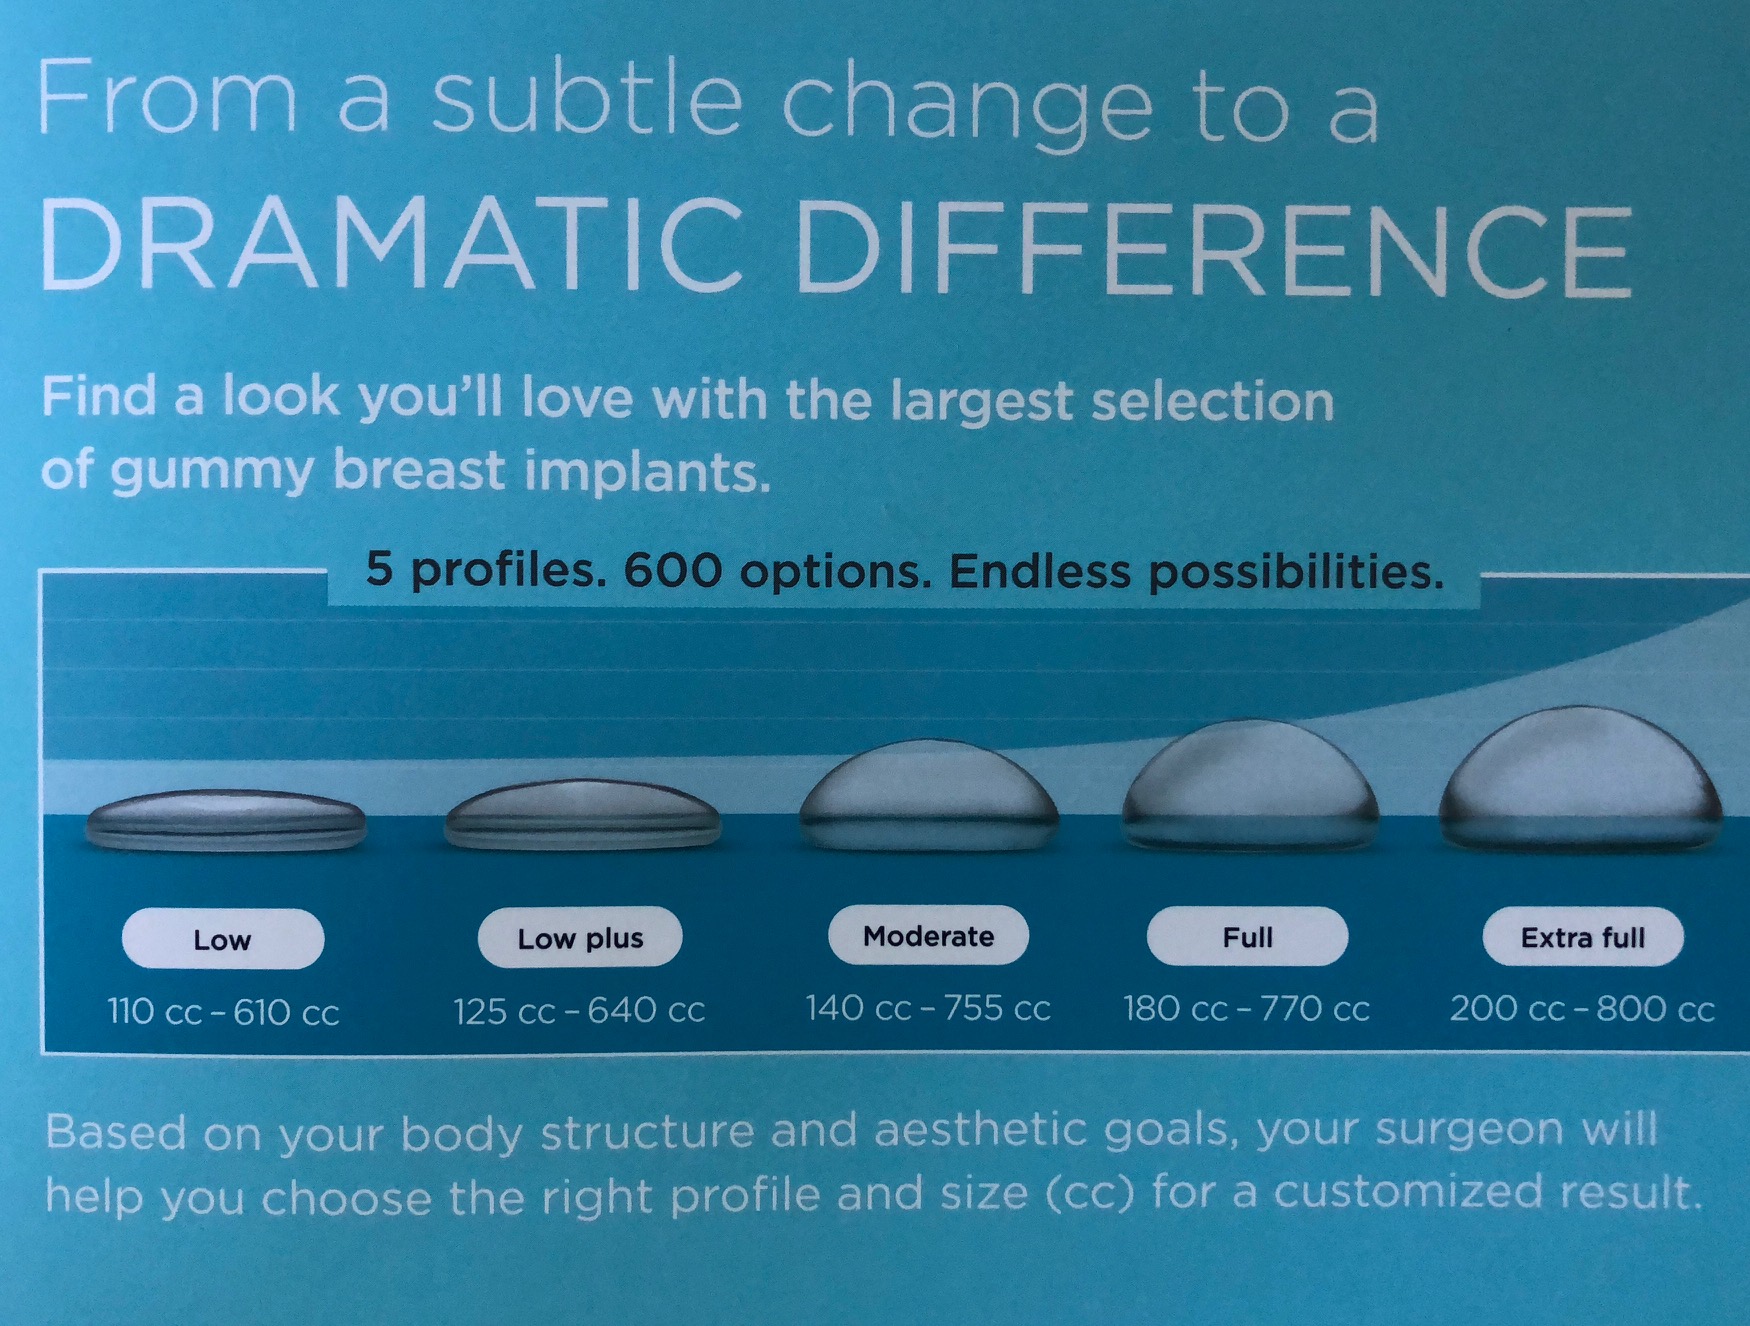 Not Too Big, Not Too Small: Just Right: Moderate Profile Implants